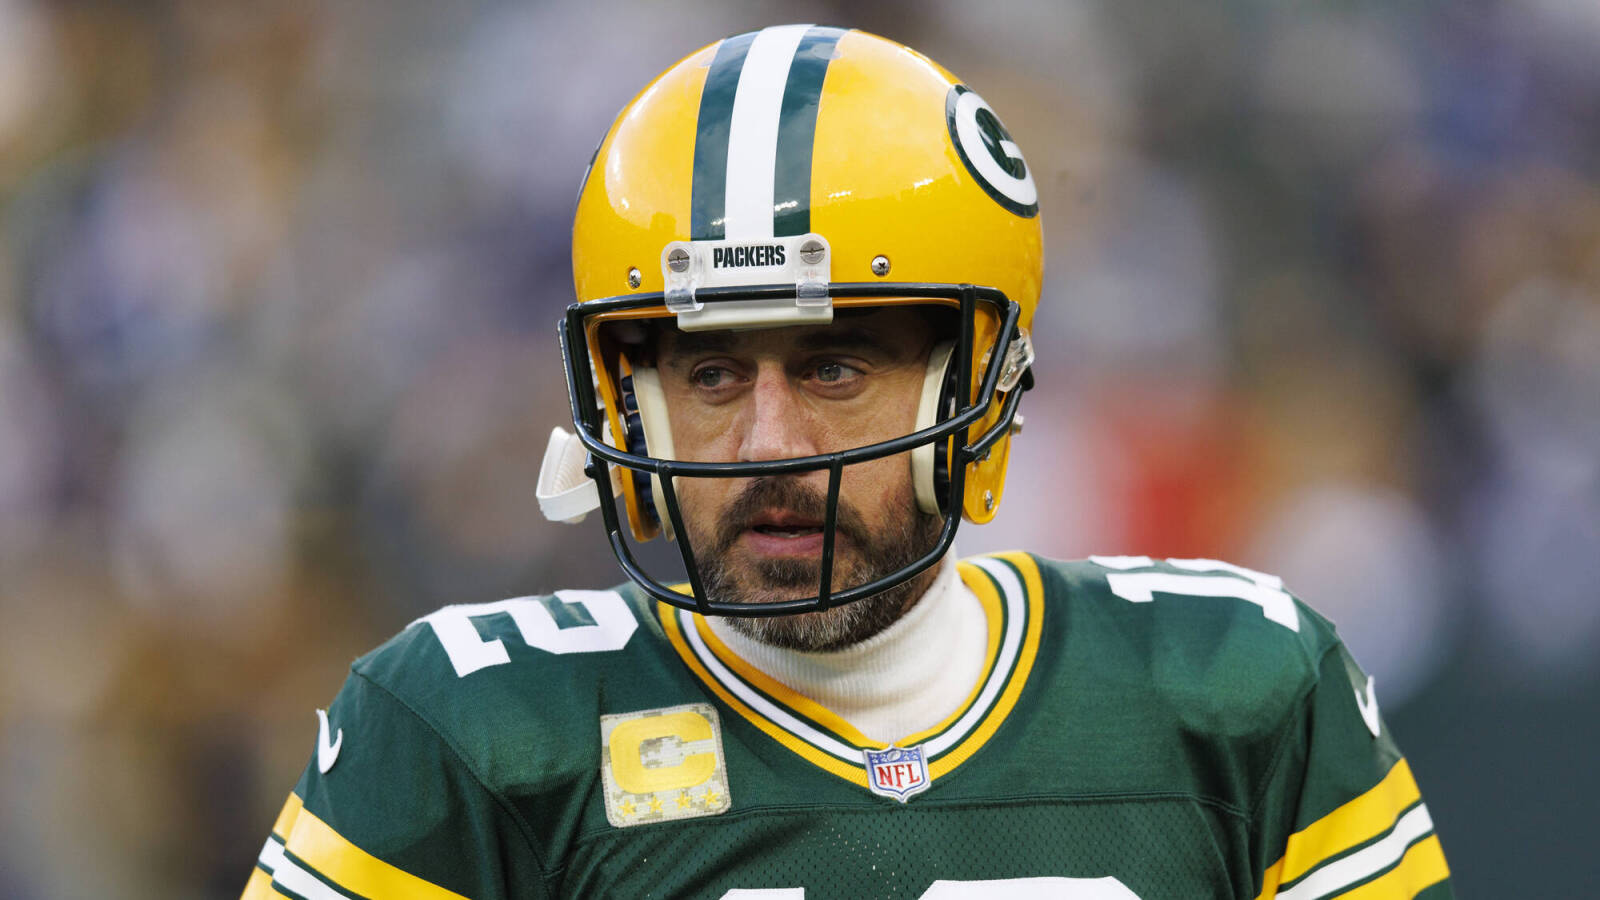 New details emerge about Aaron Rodgers’ thumb injury